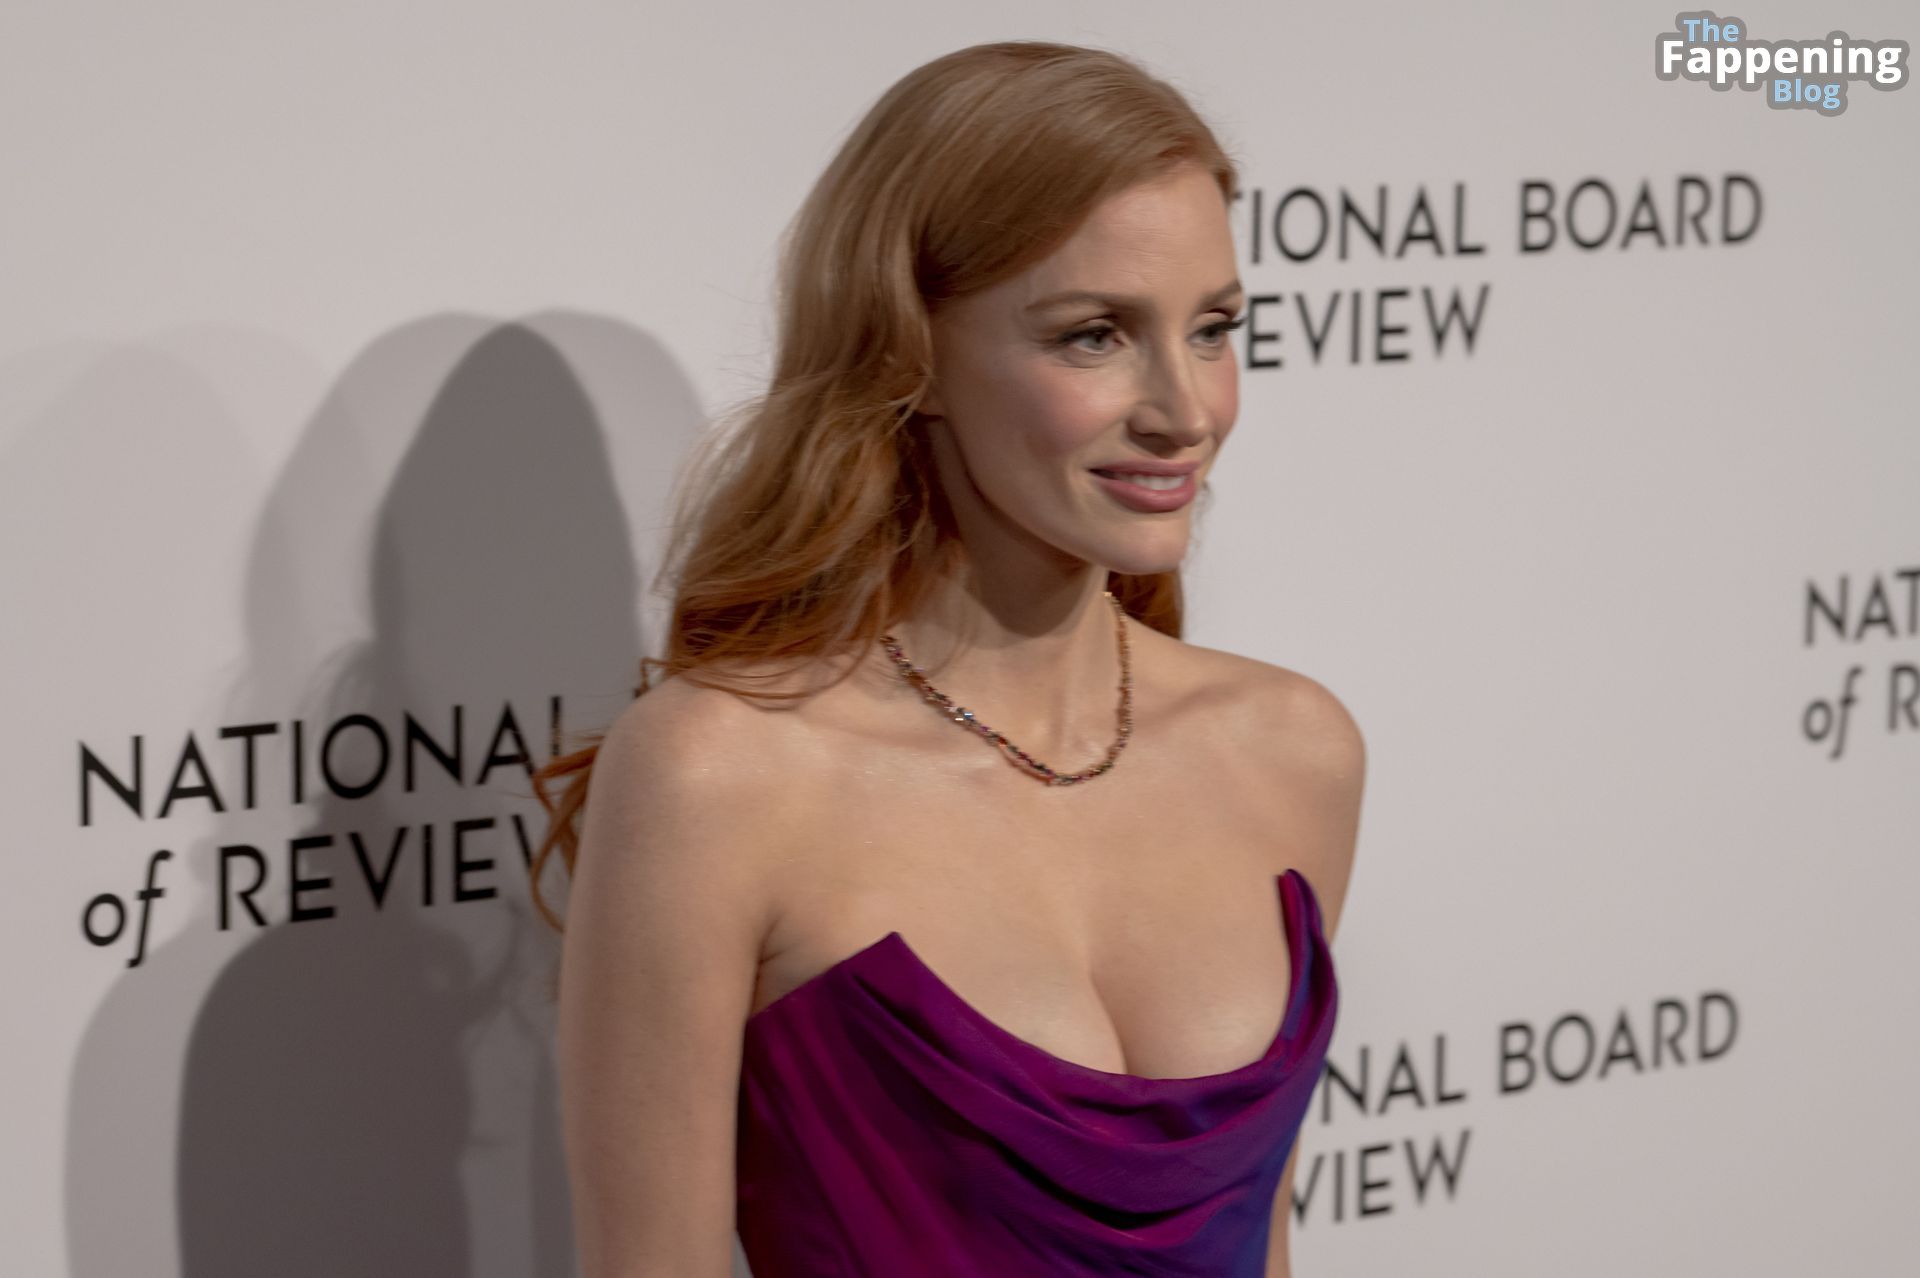 Jessica-Chastain-Sexy-23-The-Fappening-Blog-1.jpg